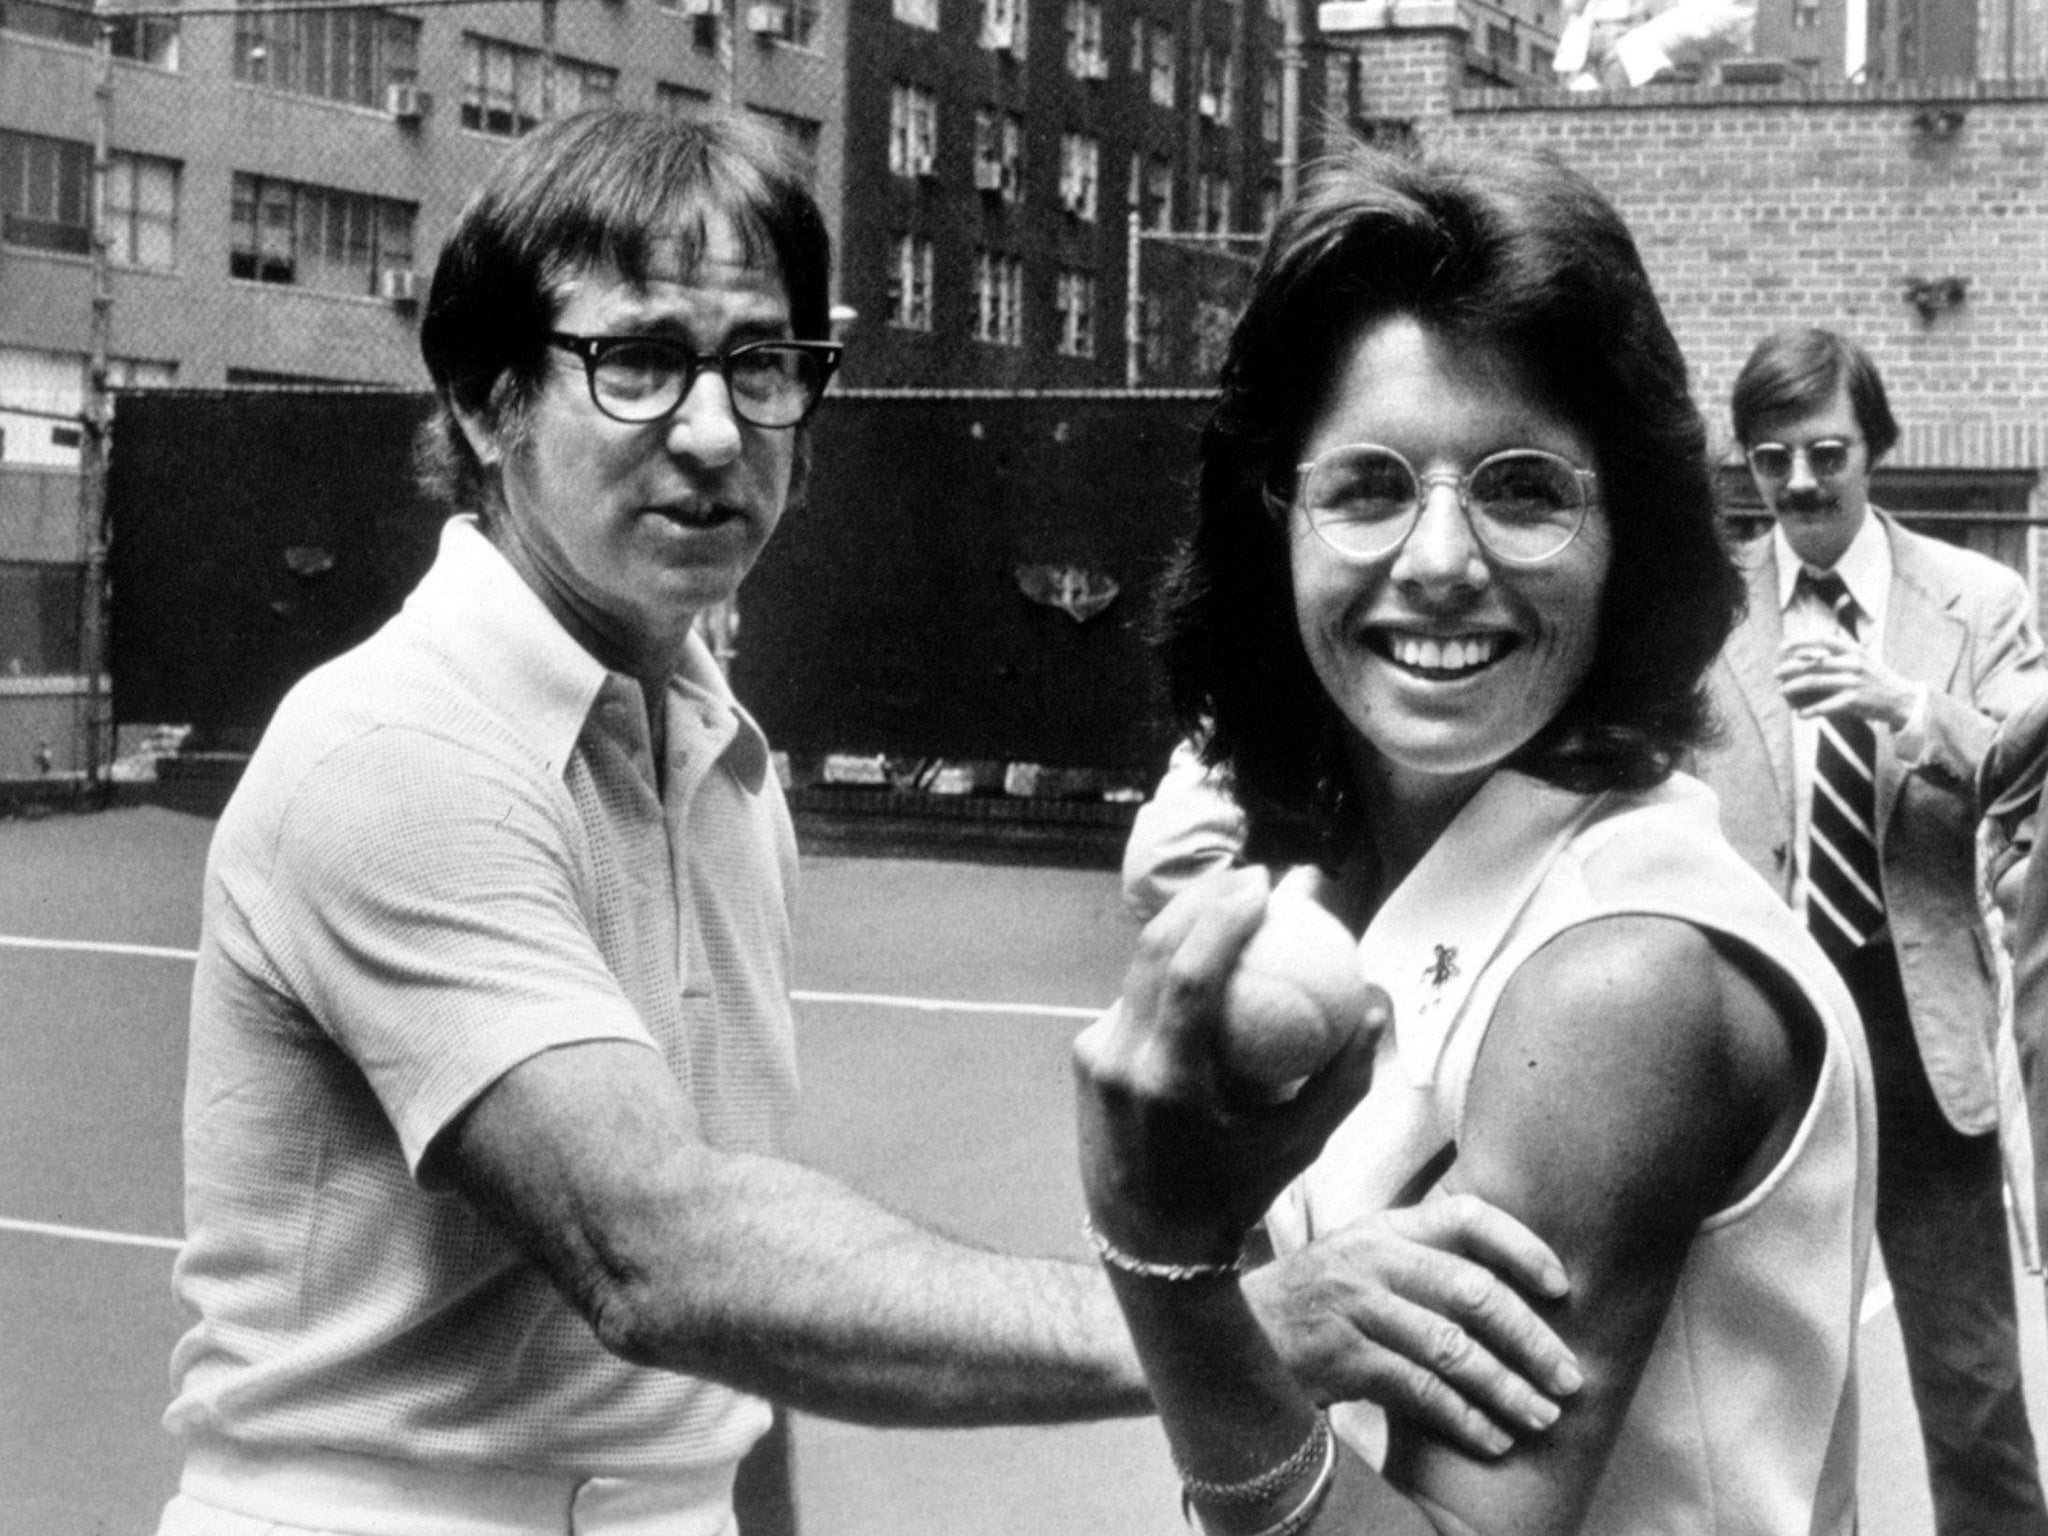 Film - Battle of the Sexes - Into Film